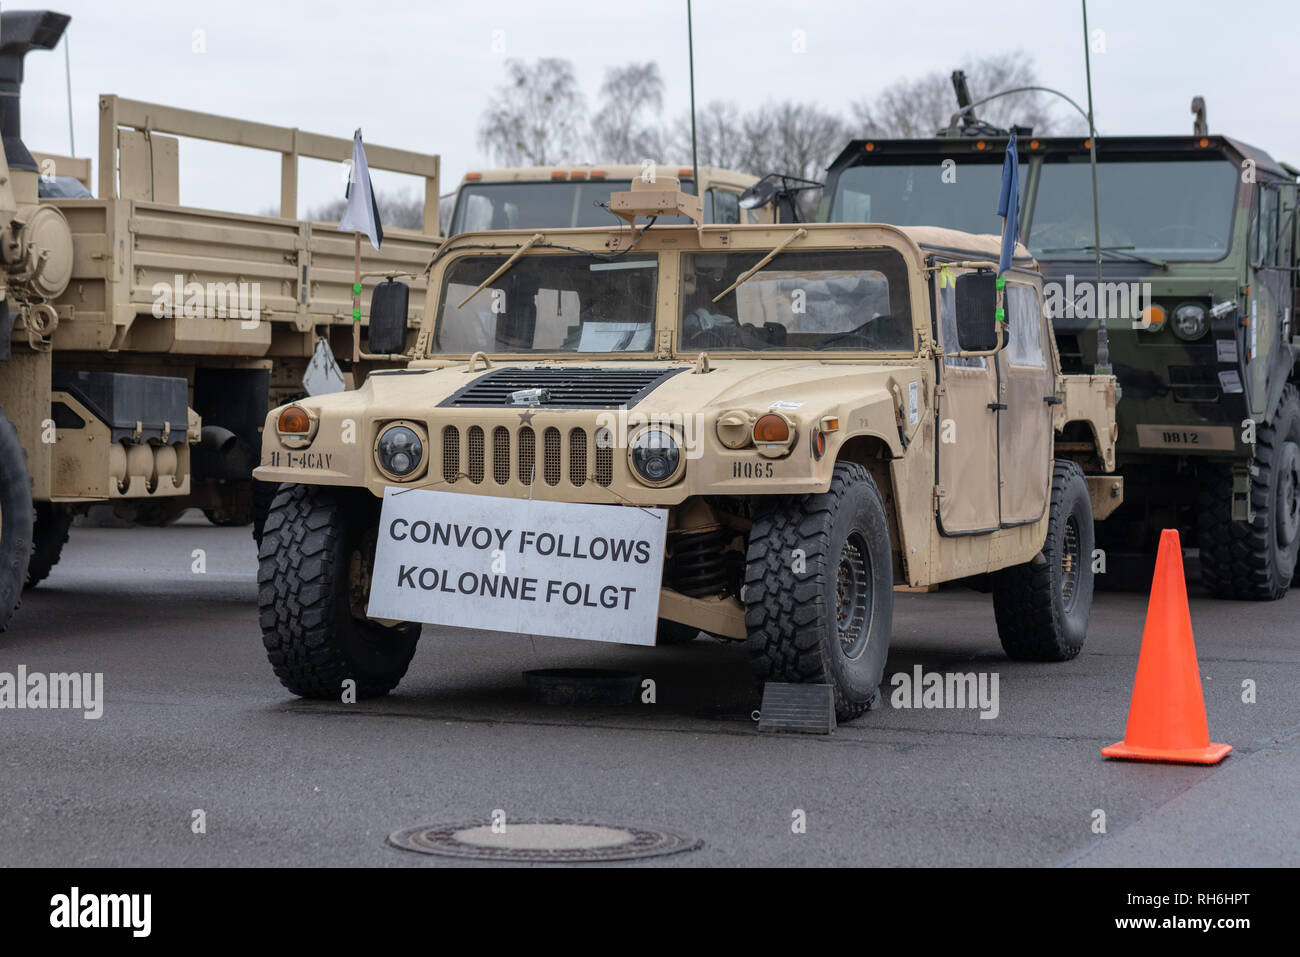 Burg, Germany - February 1, 2019: The command vehicle of a US Army military convoy is parked at the Clausewitz-Kaserne of the Bundeswehr in Burg. In Germany, several US military convoys will cross the state of Saxony-Anhalt until Sunday. They are on the move at night and use the Autobahn 2. They stop for a rest at the Clausewitz barracks in Burg. From there they continue to various locations in Poland. Credit: Mattis Kaminer/Alamy Live News Stock Photo